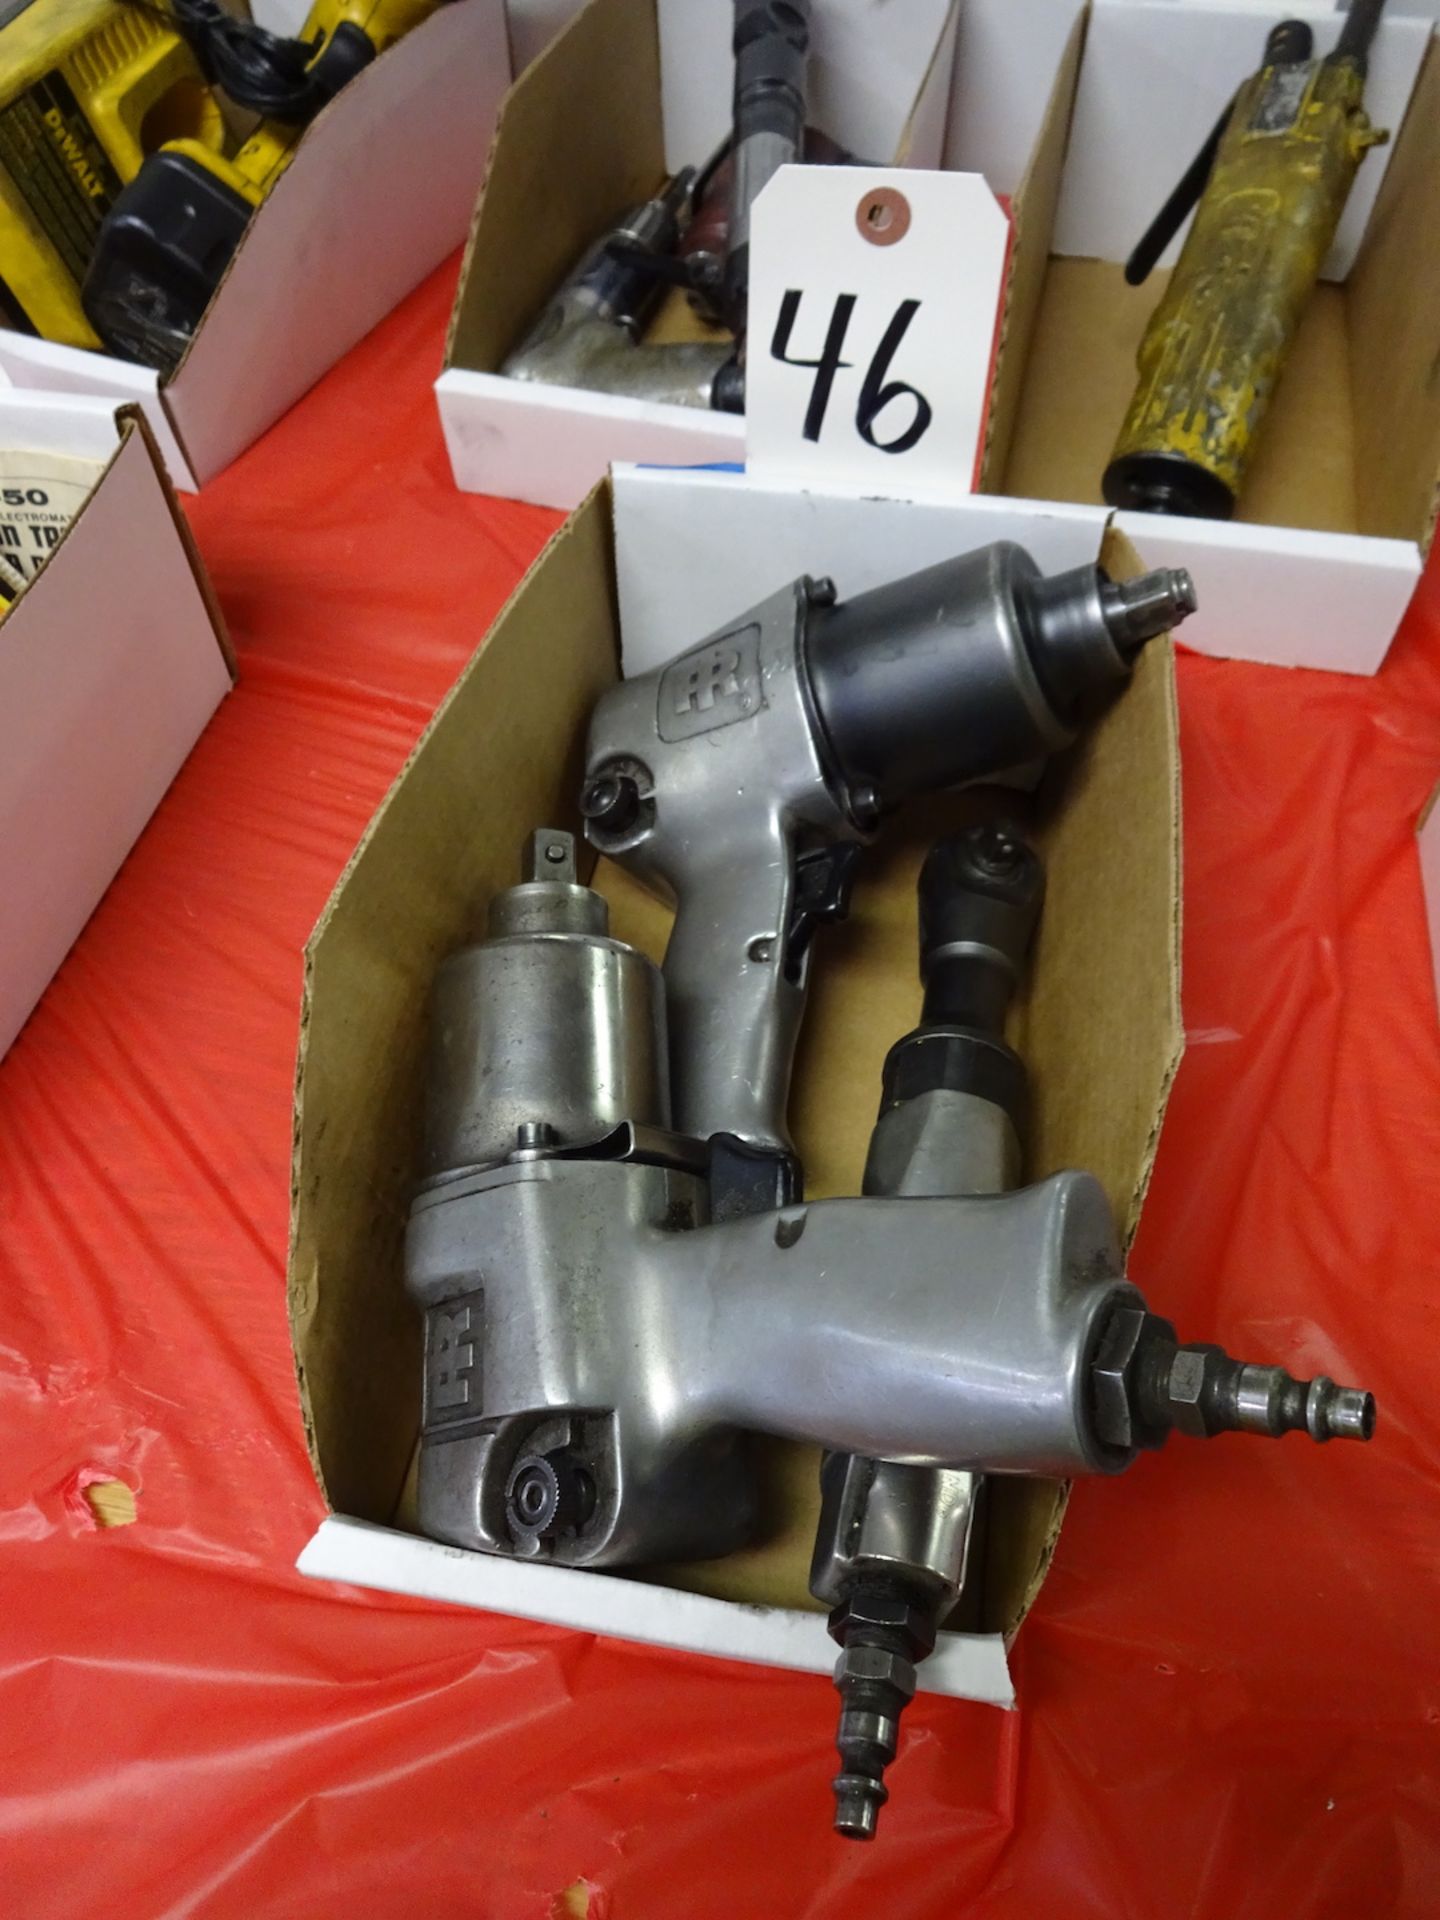 LOT: (2) Ingersoll Rand Pneumatic Impact Wrenches, Ingersoll Rand Pneumatic Right Angle Ratchet